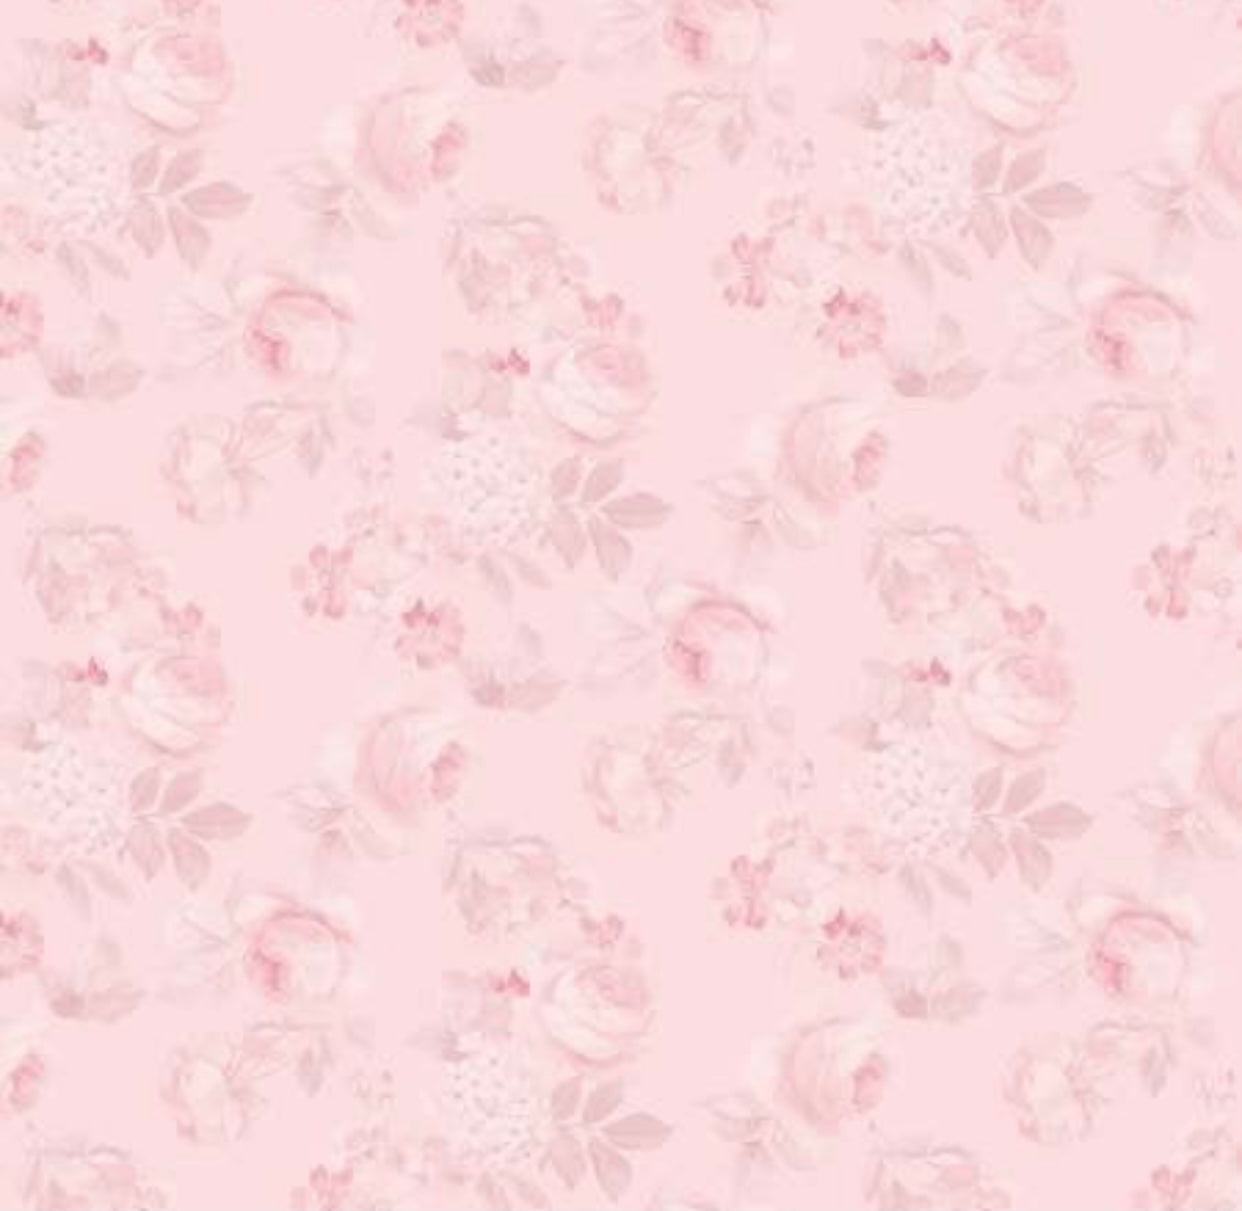 Rose and Violet`s Garden Fabric. Blush Fat Quarter Collection No 6